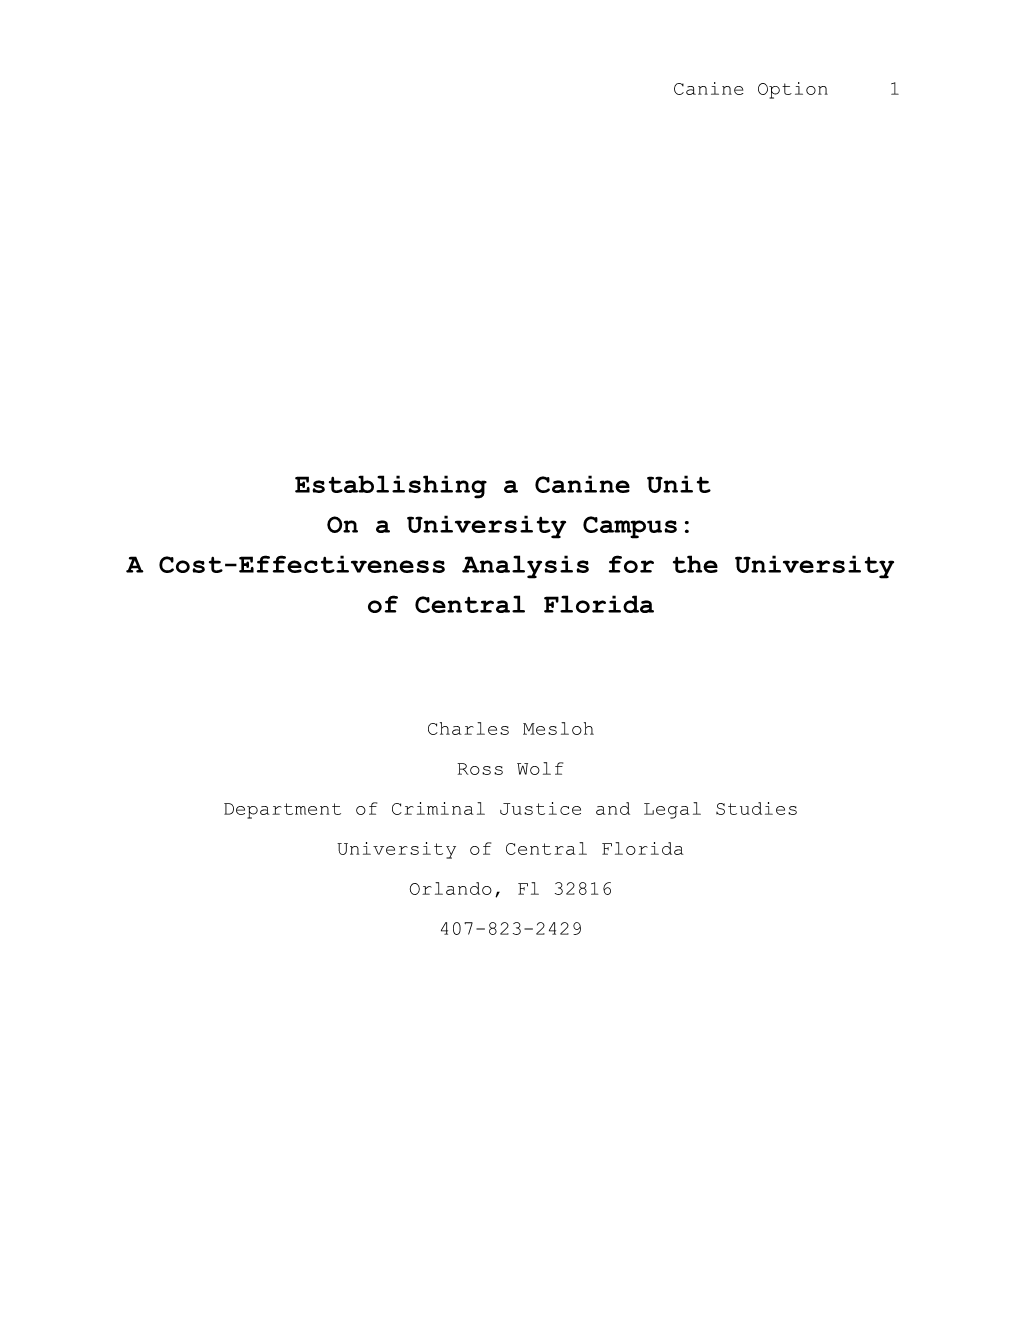 A Cost-Effectiveness Analysis for the University of Central Florida